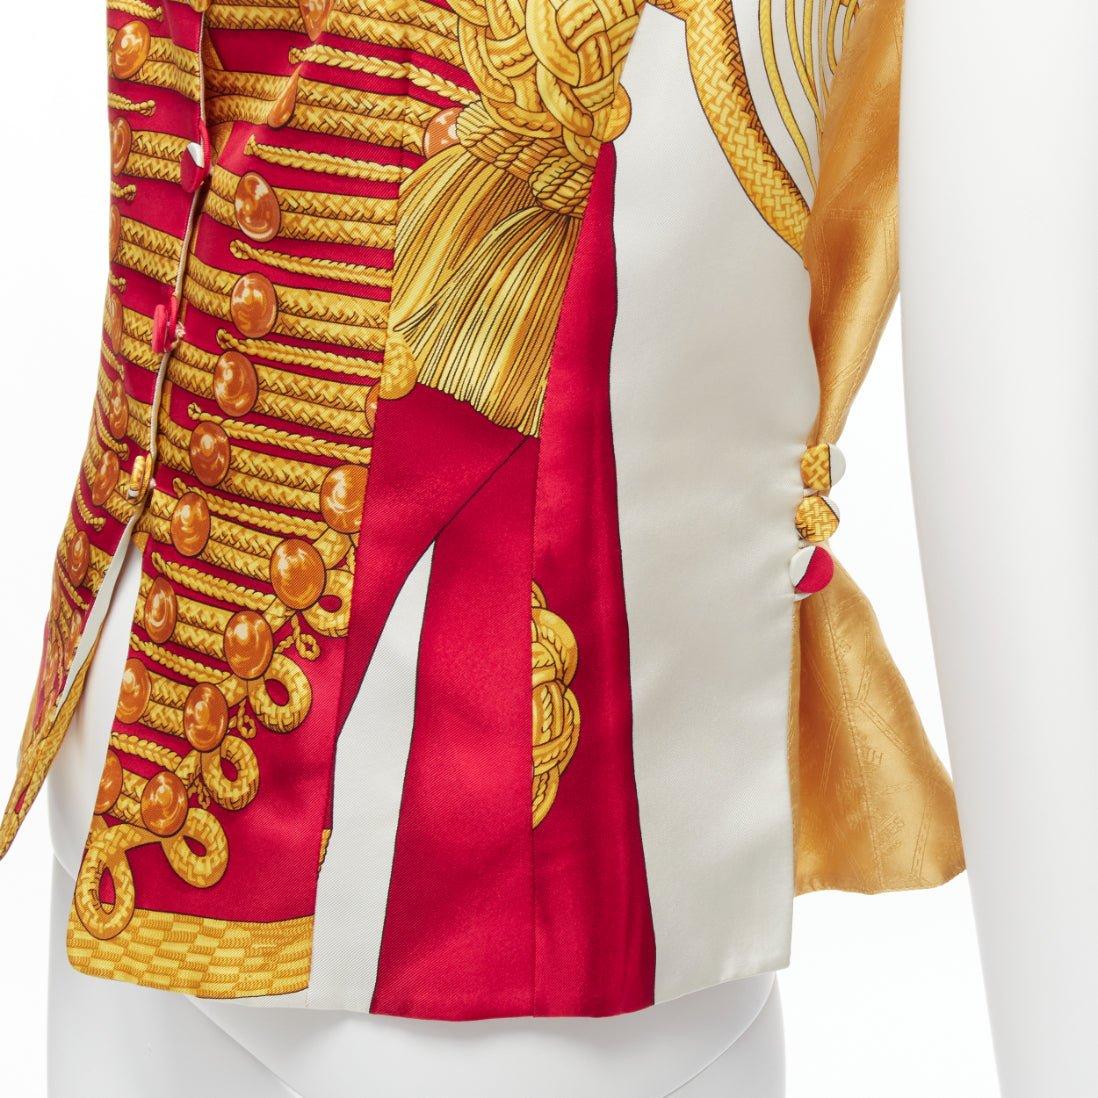 rare HERMES Vintage Hussar Tromp Loeil print red gold silk buttons waistcoat vest FR40 L
Reference: TGAS/D00459
Brand: Hermes
Material: Silk
Color: Red, Gold
Pattern: Photographic Print
Closure: Button
Lining: Gold Silk
Extra Details: Gold Hermes